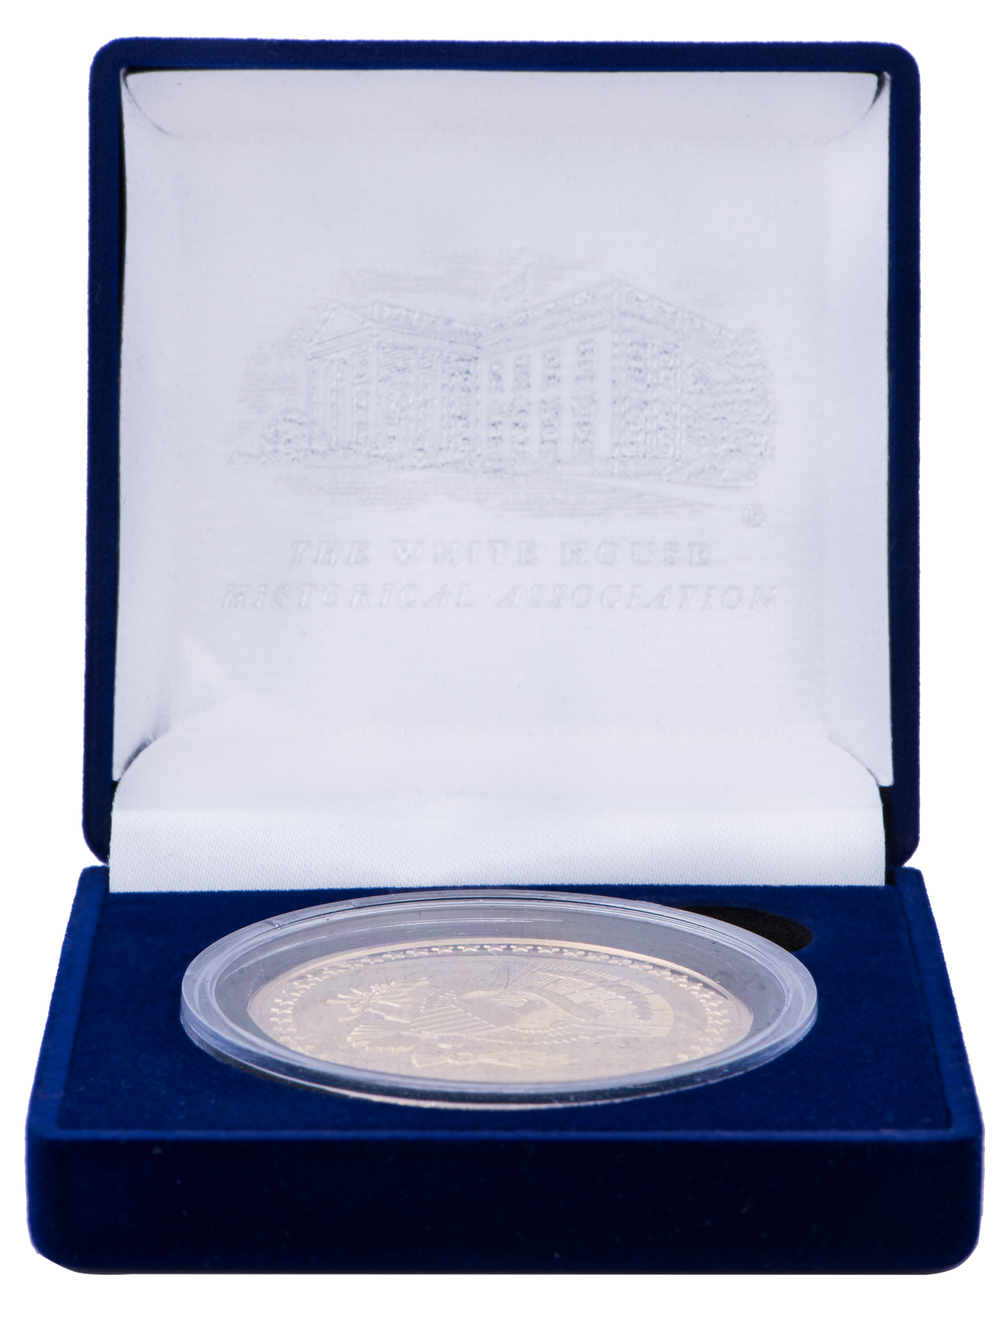 https://shop.whitehousehistory.org/cdn/shop/products/challengecoin-box_1_1000x.png?v=1576145506